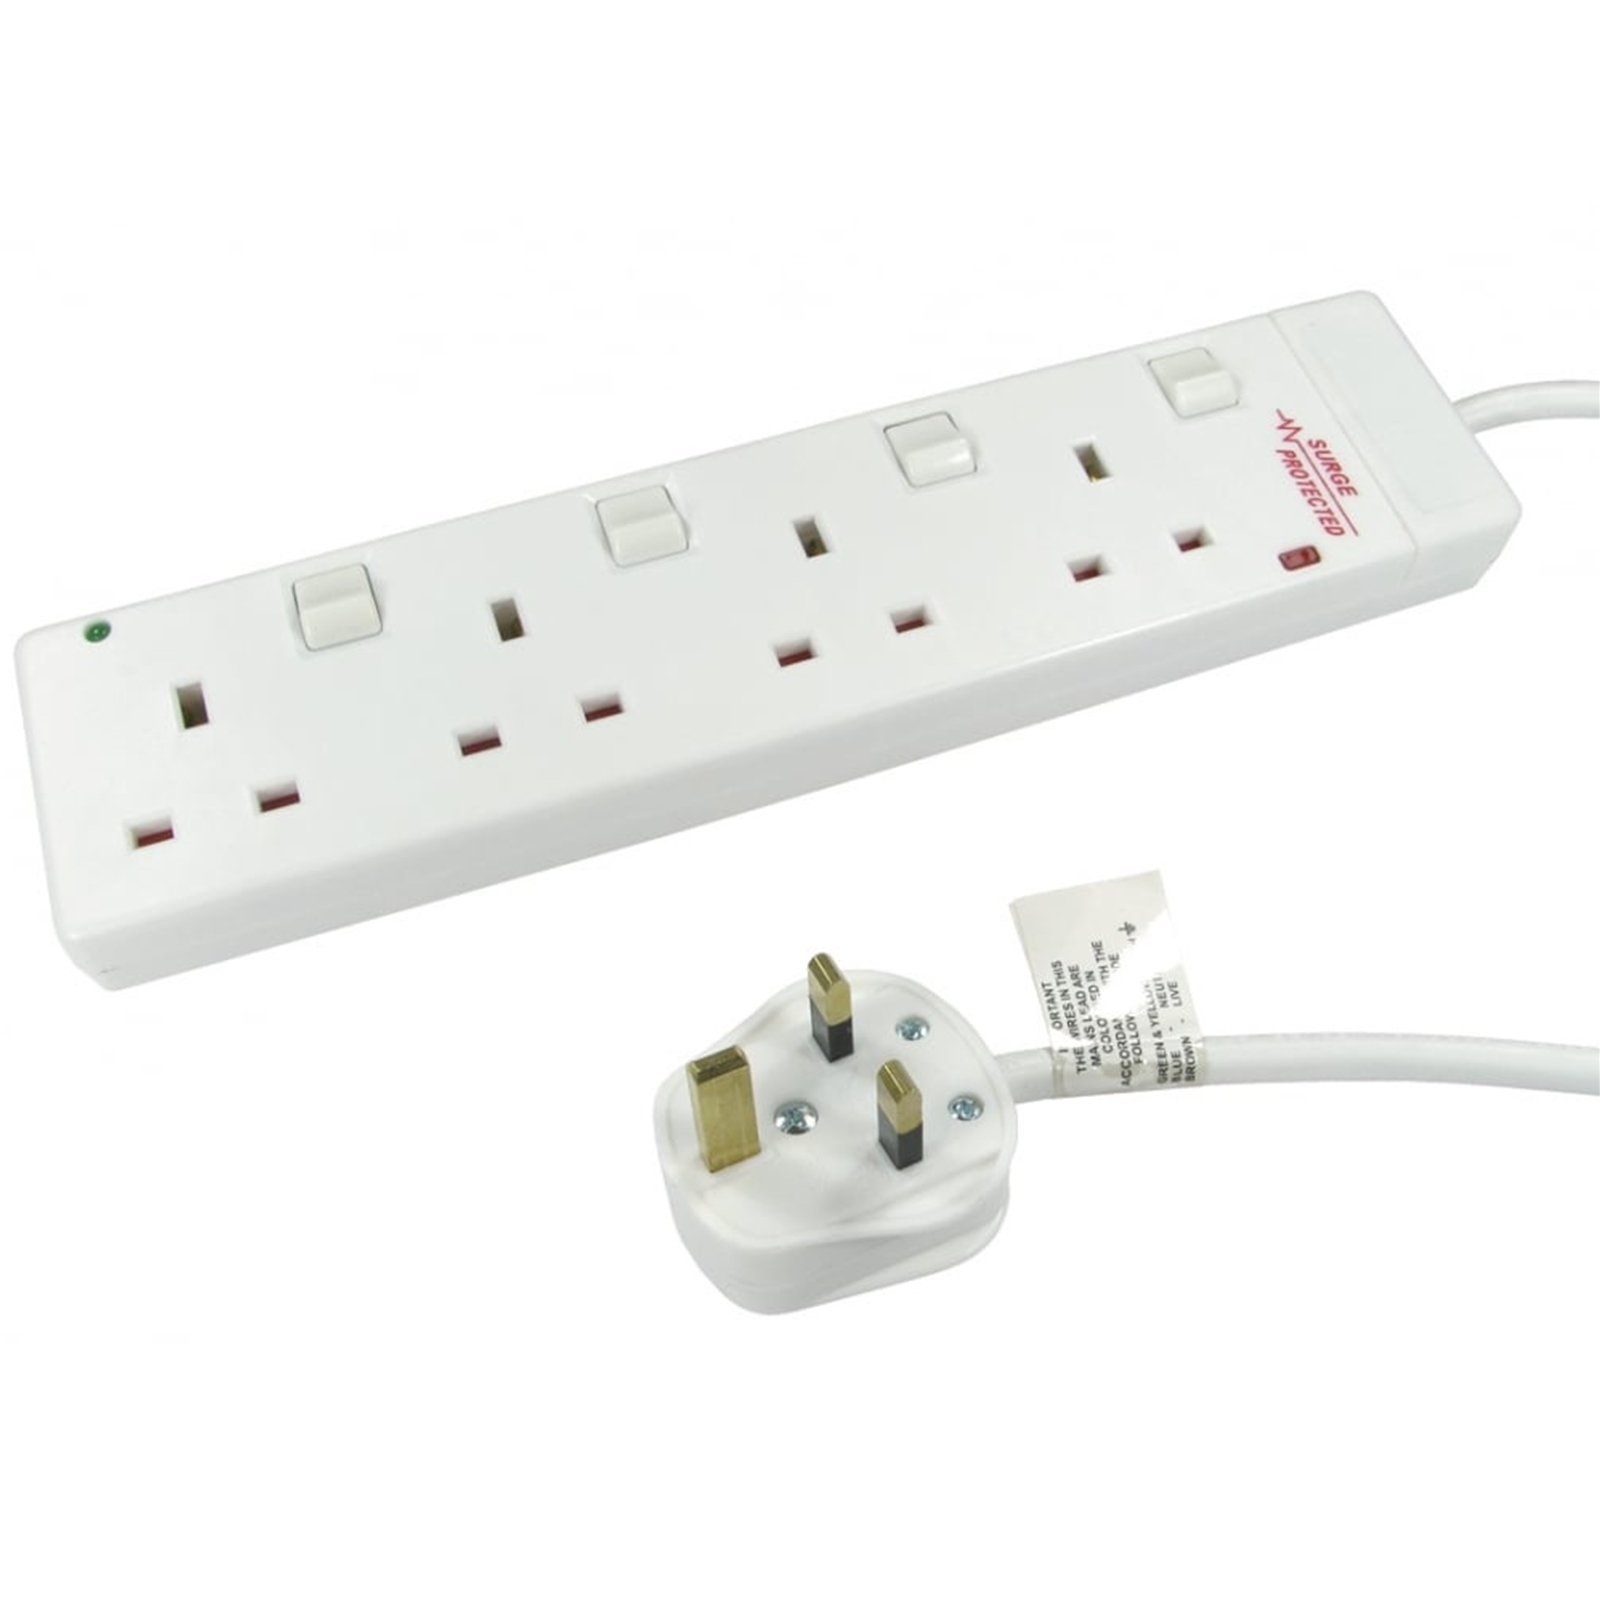 TARGET RB-02-4GANGSWD UK Power Extension, 2m, 4 UK Ports, Individually Switched, White, 13 Amp Fuse, Surge Protection, Status LED